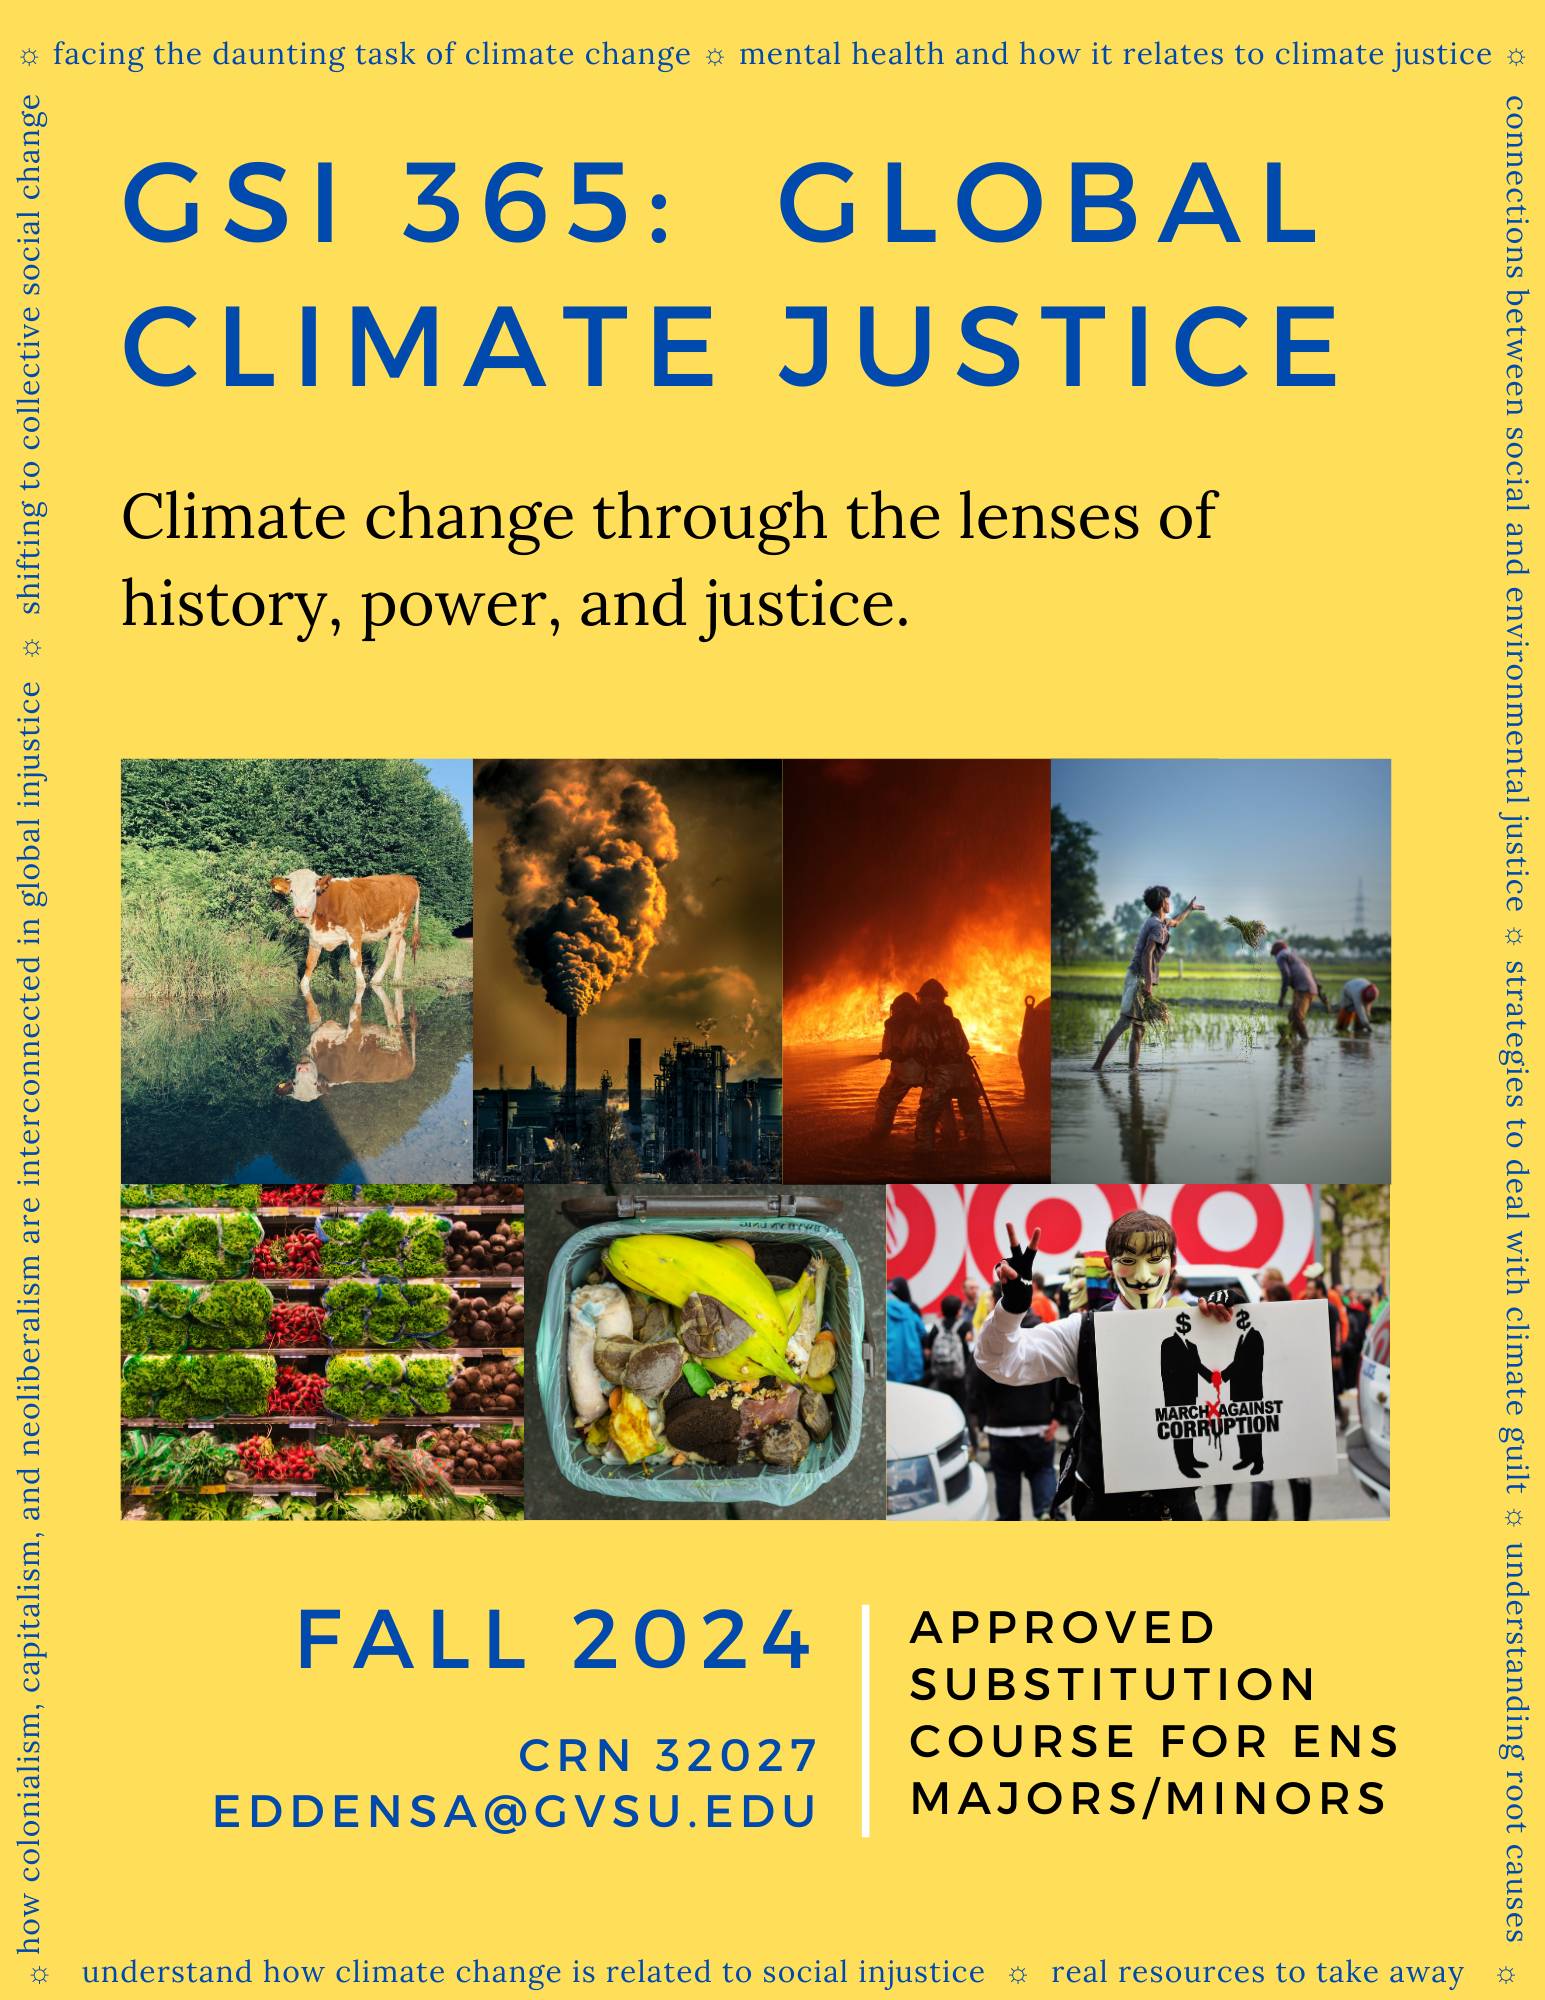 Global Climate Justice (GSI 365)